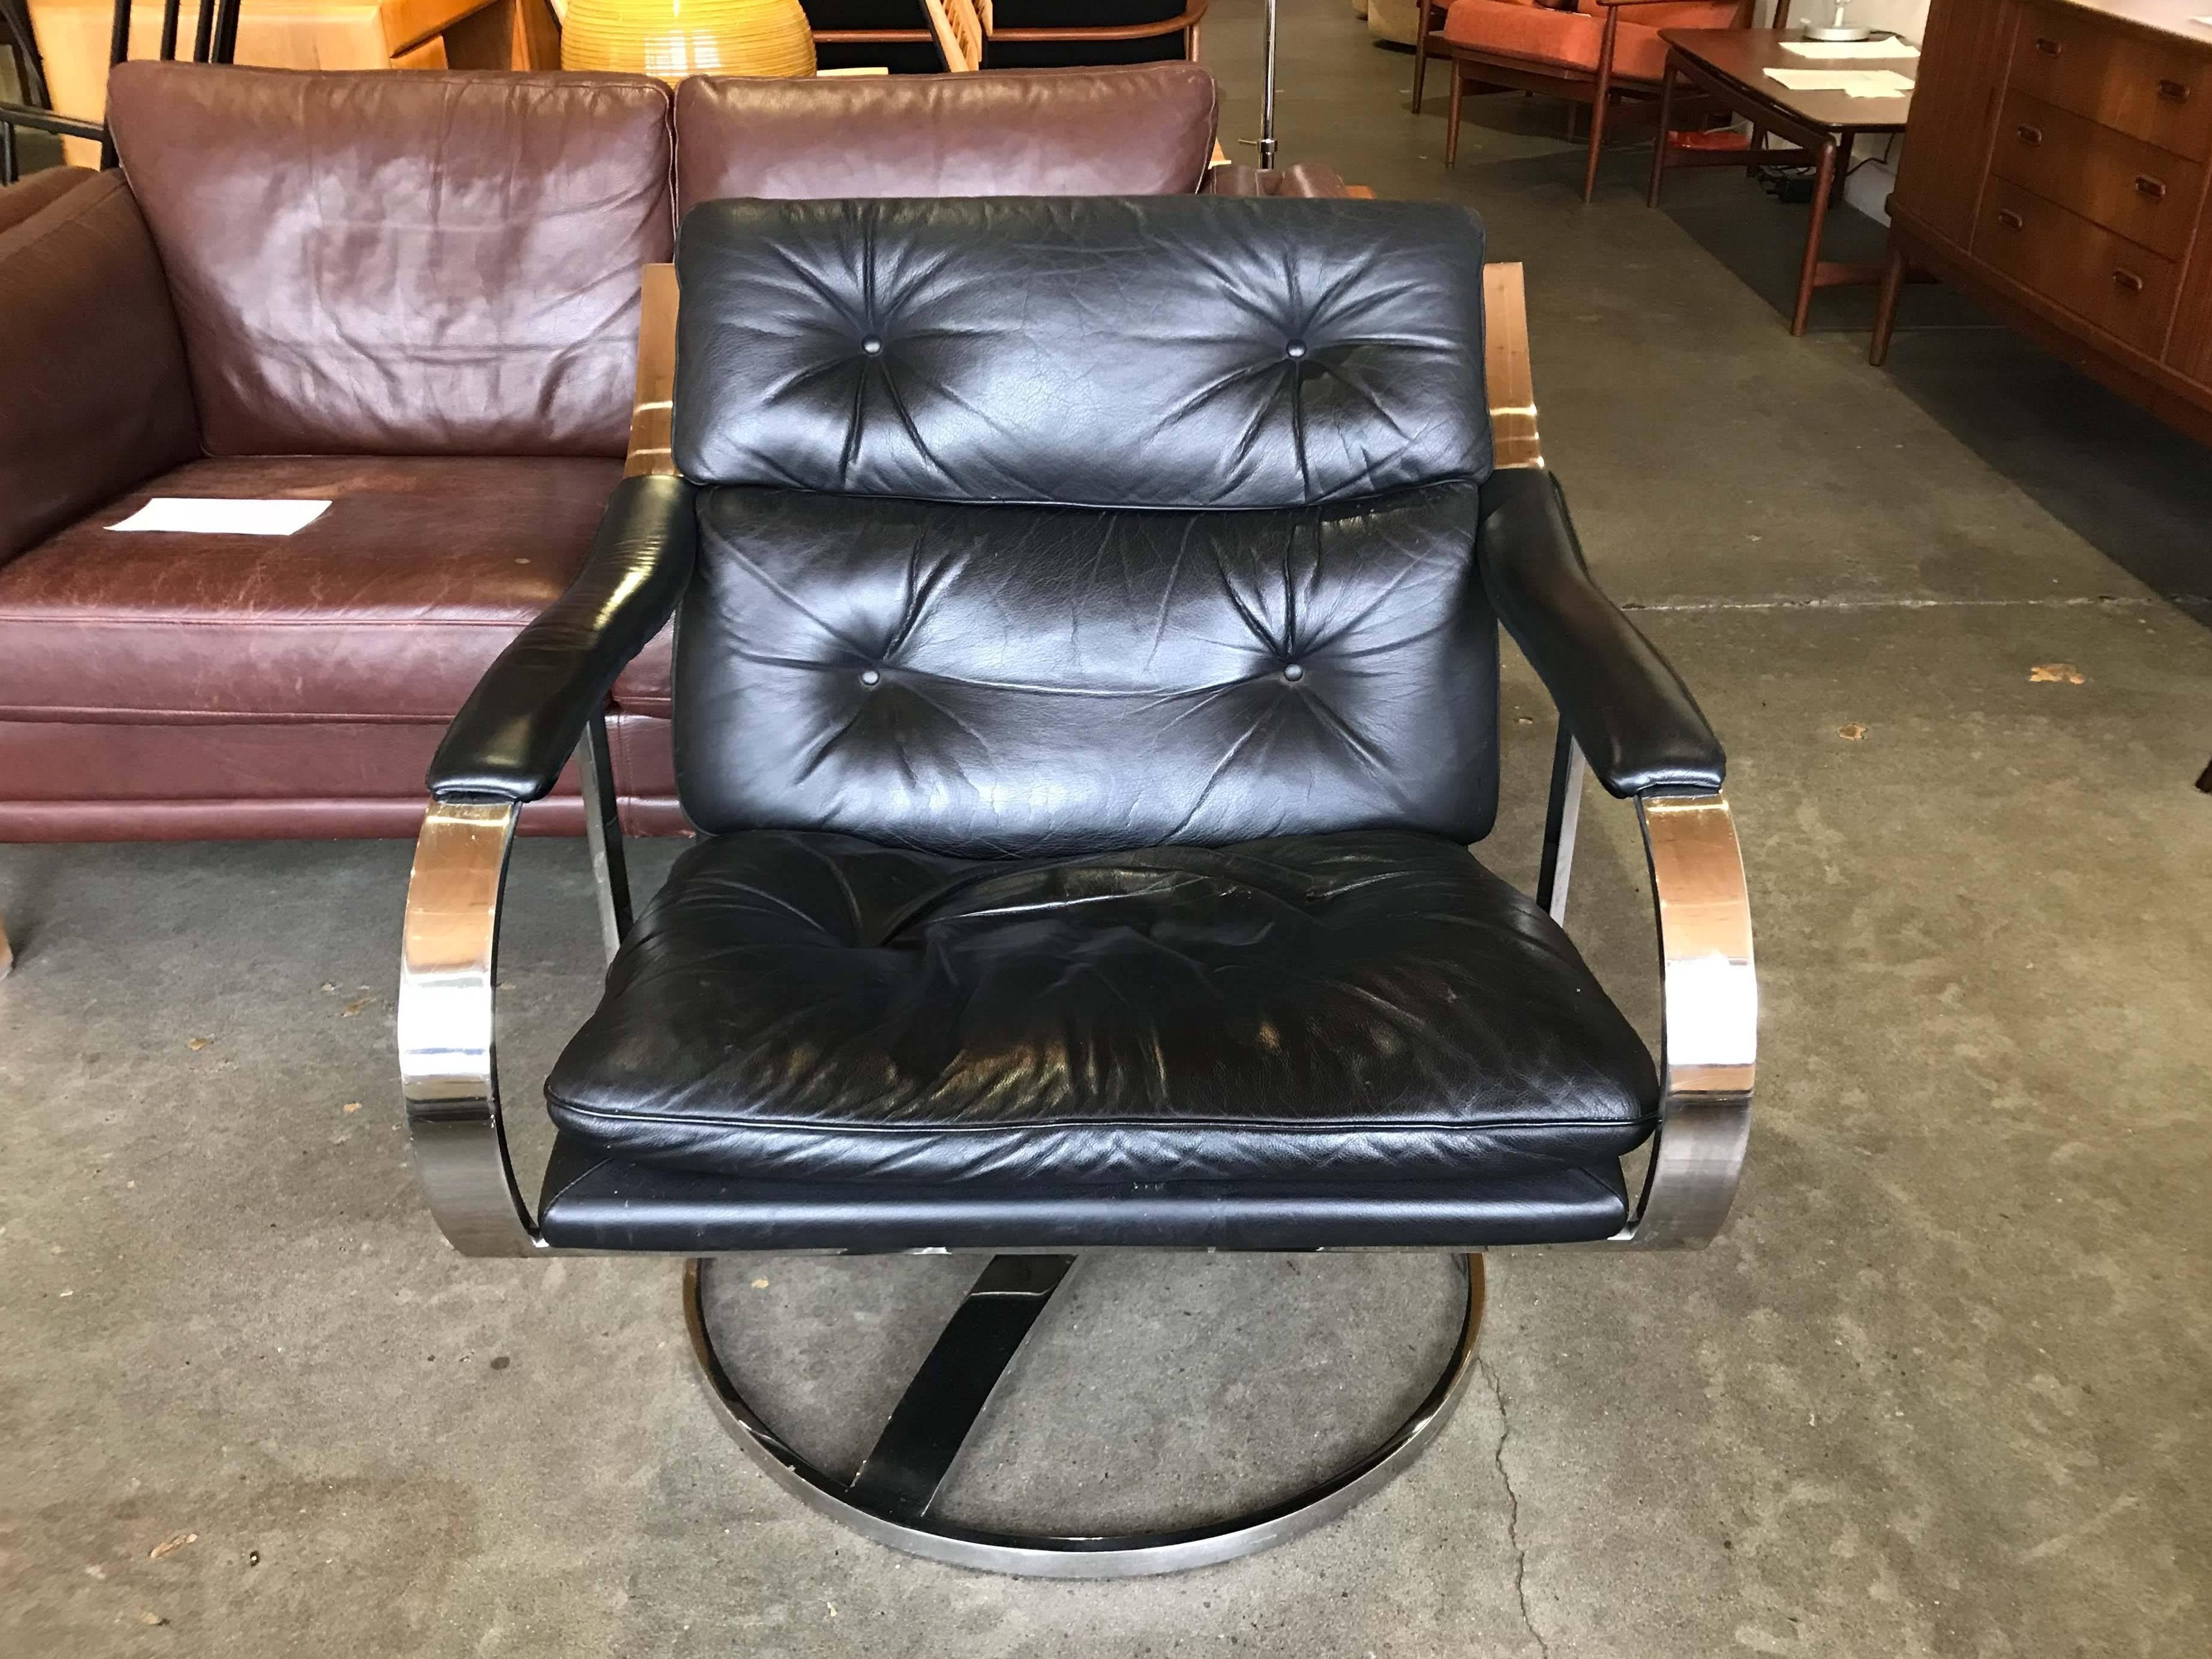 This stylish large series 445 lounge chair by Gardner Leaver for Steelcase. The seats have a very comfortable pitch and swivel on round bases. The chair retains it's original leather upholstery which does show signs of age and use, please note the